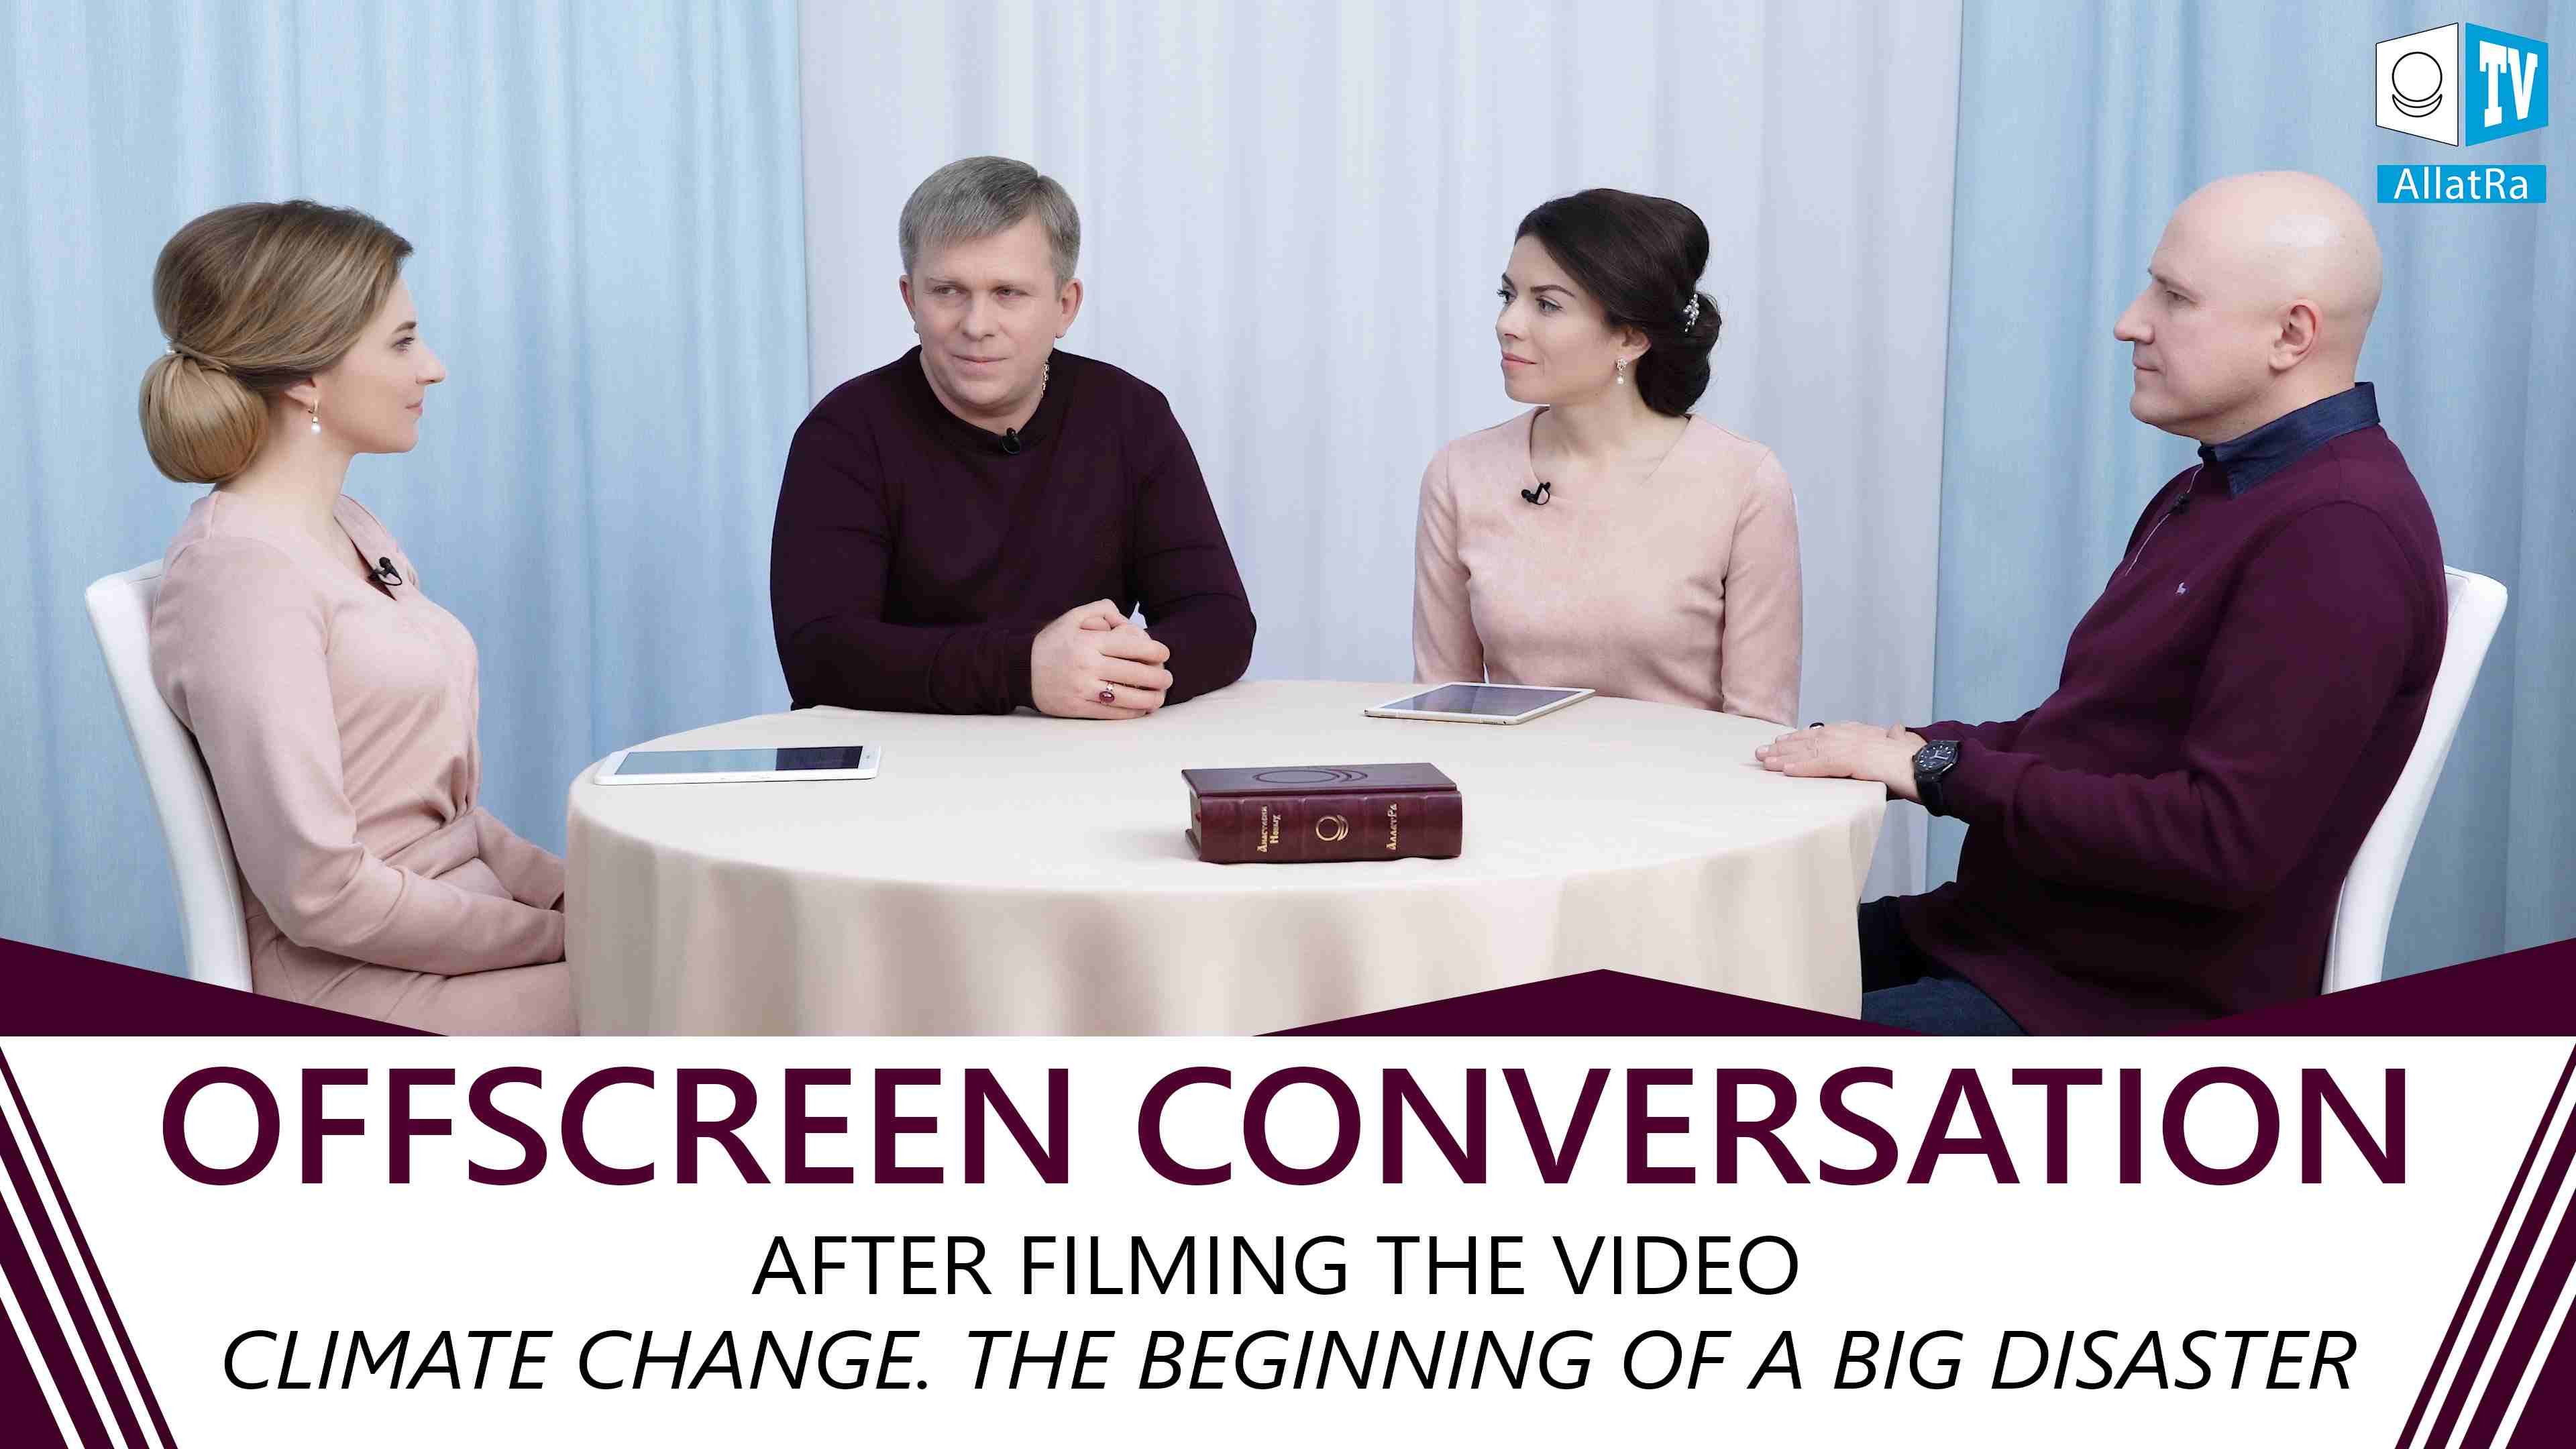 Offscreen Conversation After Filming the Video “Climate Change. The Beginning of a Big Disaster”